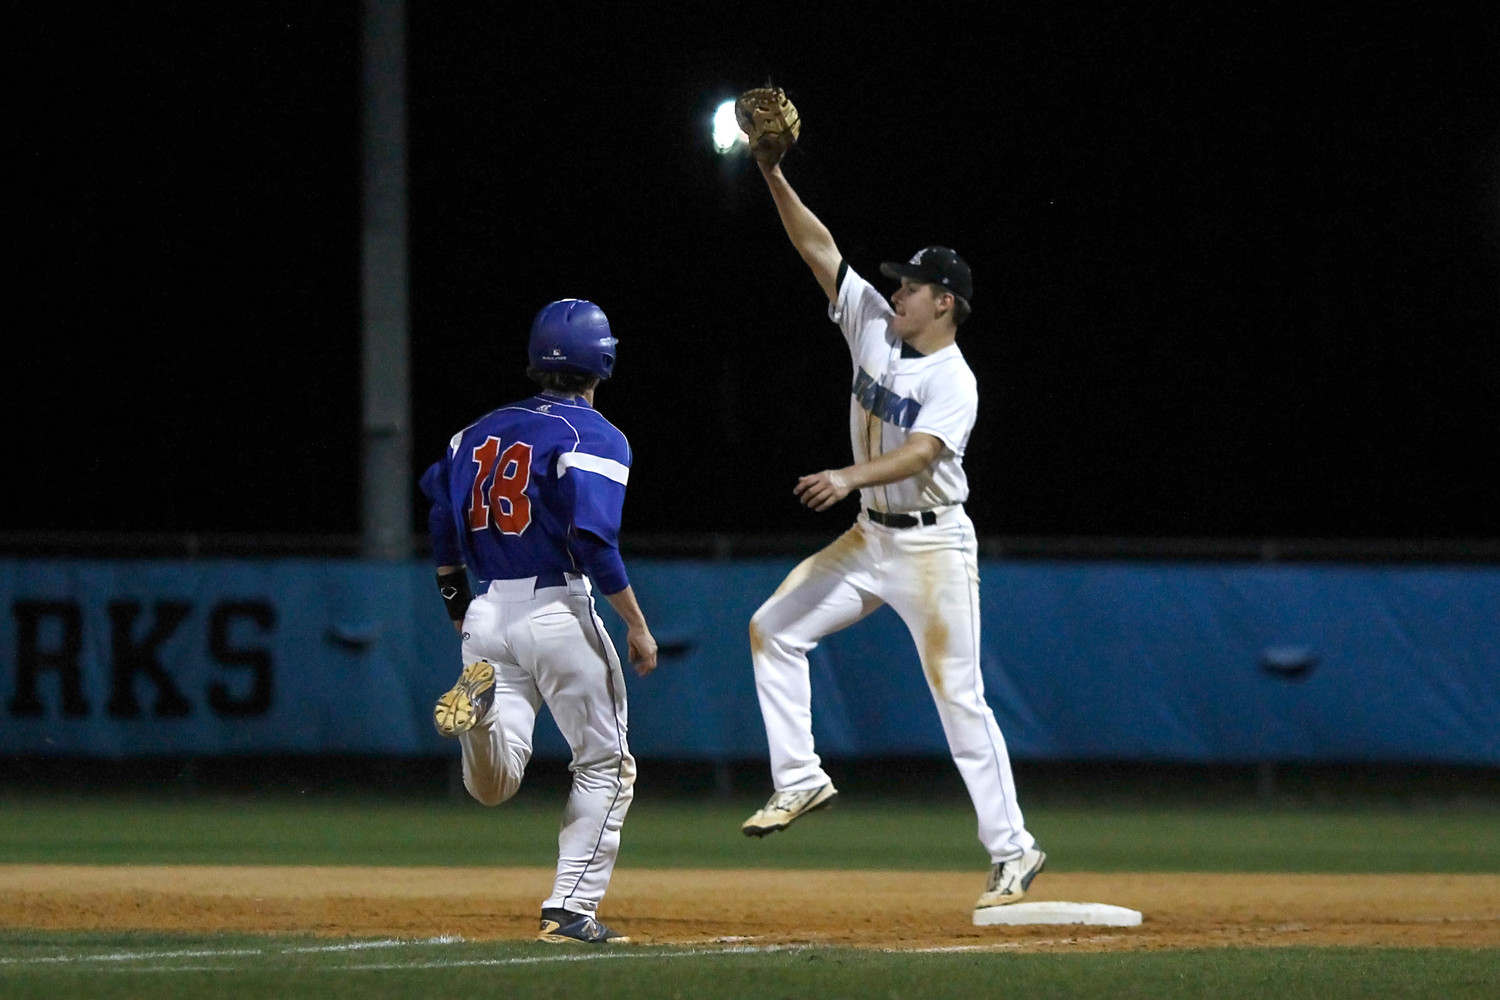 Sharks first baseman Tony Roca stretches high to retire the Bolles batter.